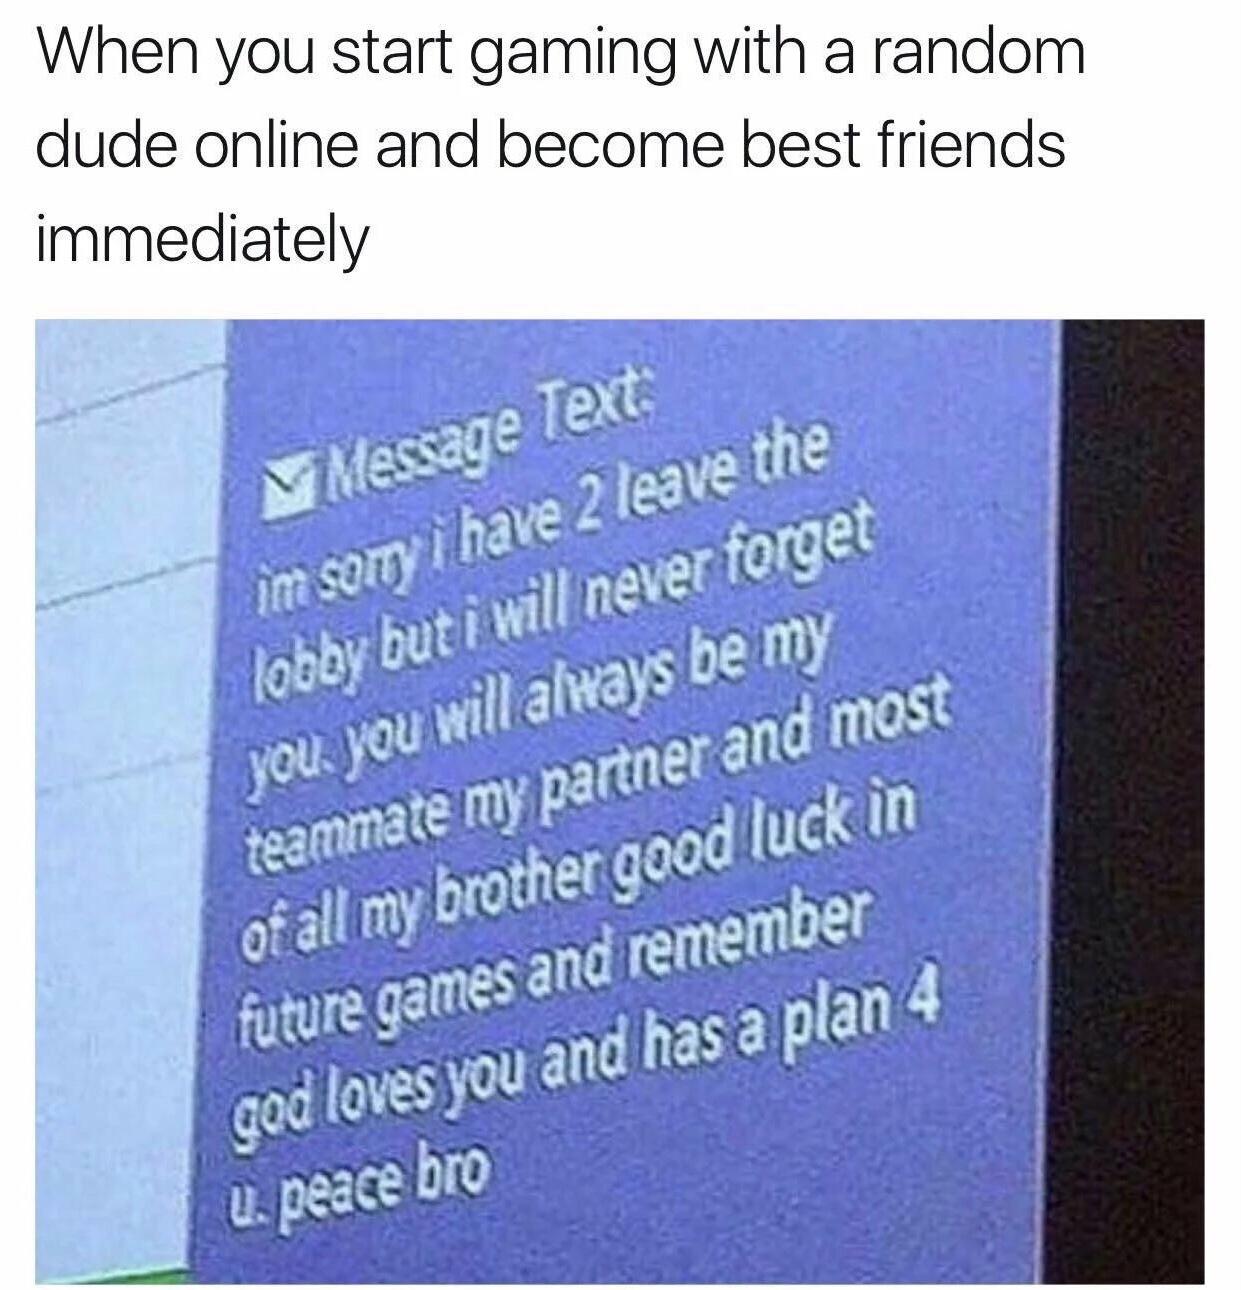 wholesome gaming moments - When you start gaming with a random dude online and become best friends immediately Message Text im som i have 2 leave the loboy but i will never forget you. you will always be my teammate my partner and most Of all my brother g